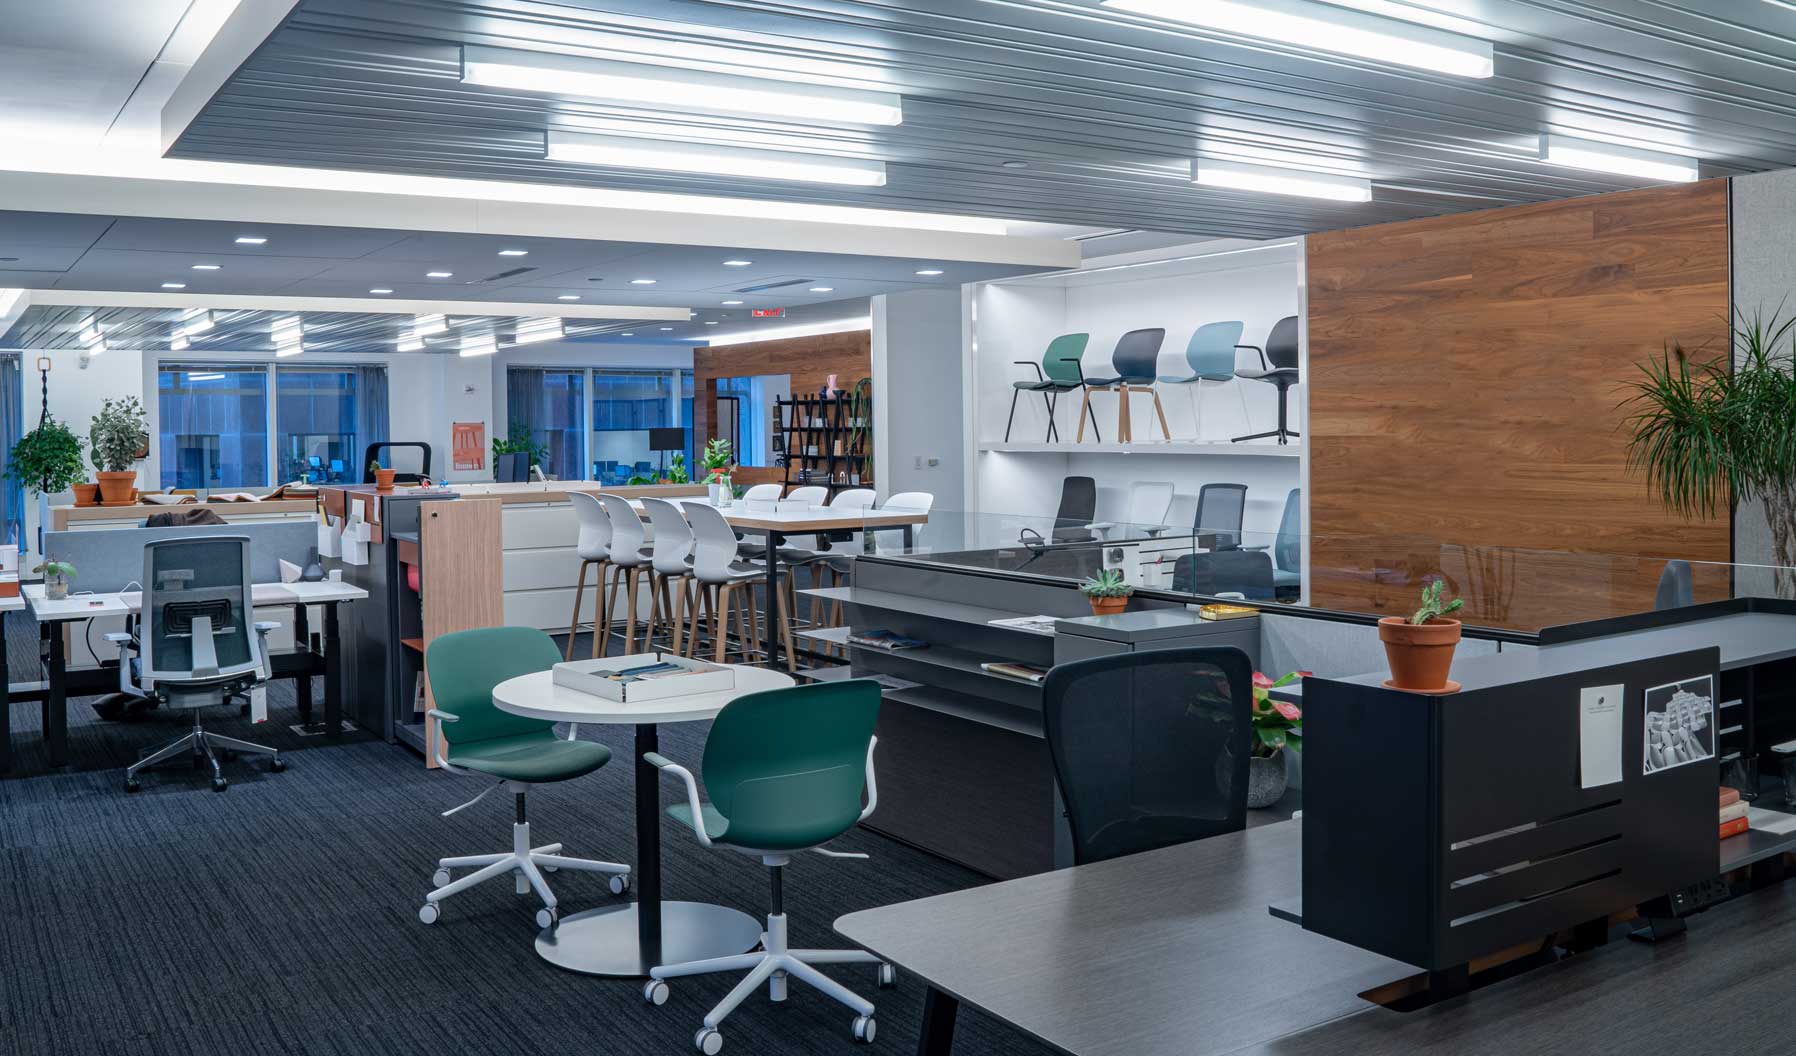 A small collaborative space embedded in a work zone supports the flow from individual work to informal collaboration without workers needed to book a space or shift from their primary work zone.